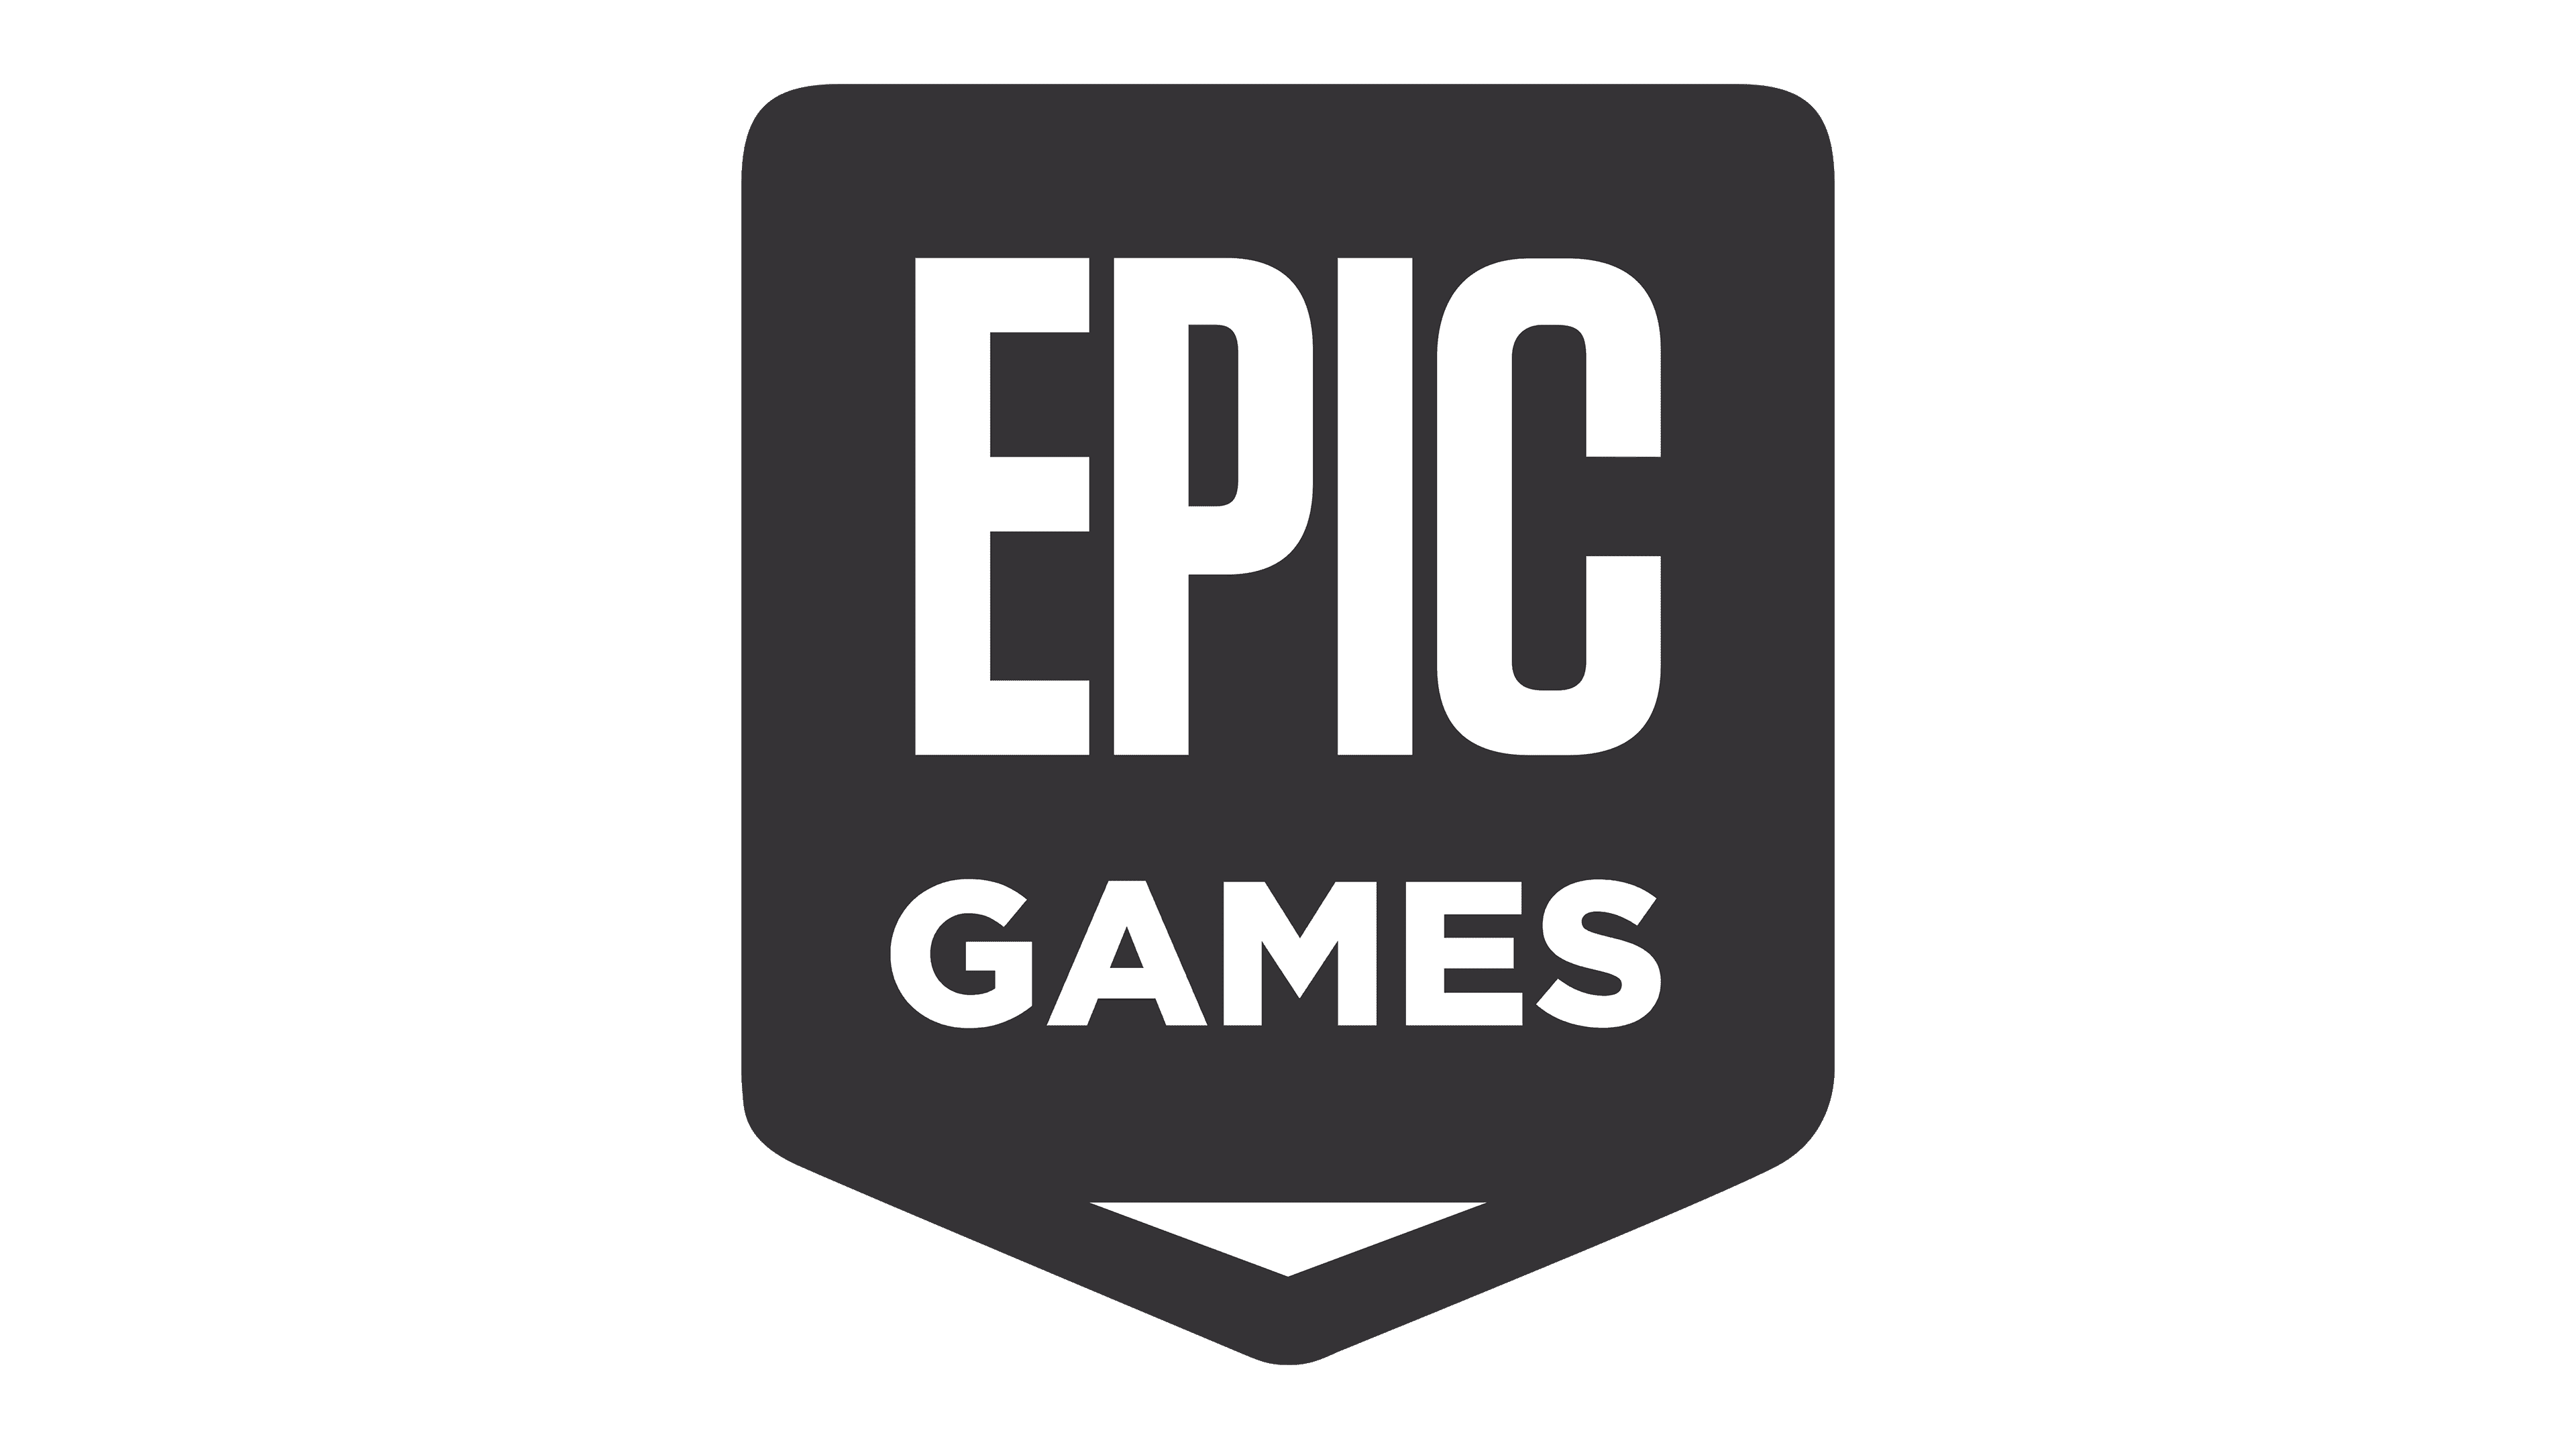 Epic Games Logo PNG Clipart